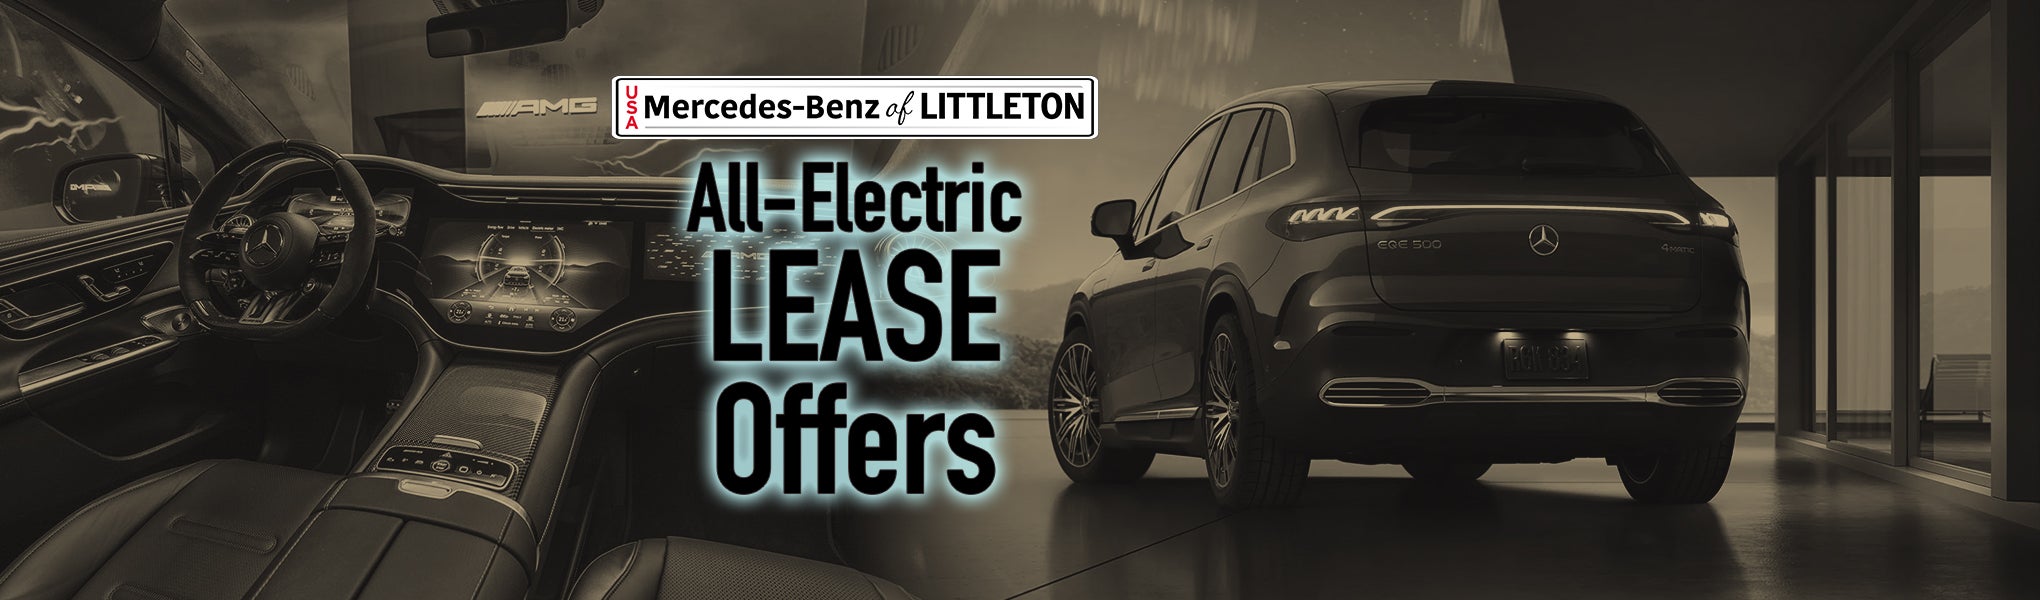 All-Electric vehicle lease offers